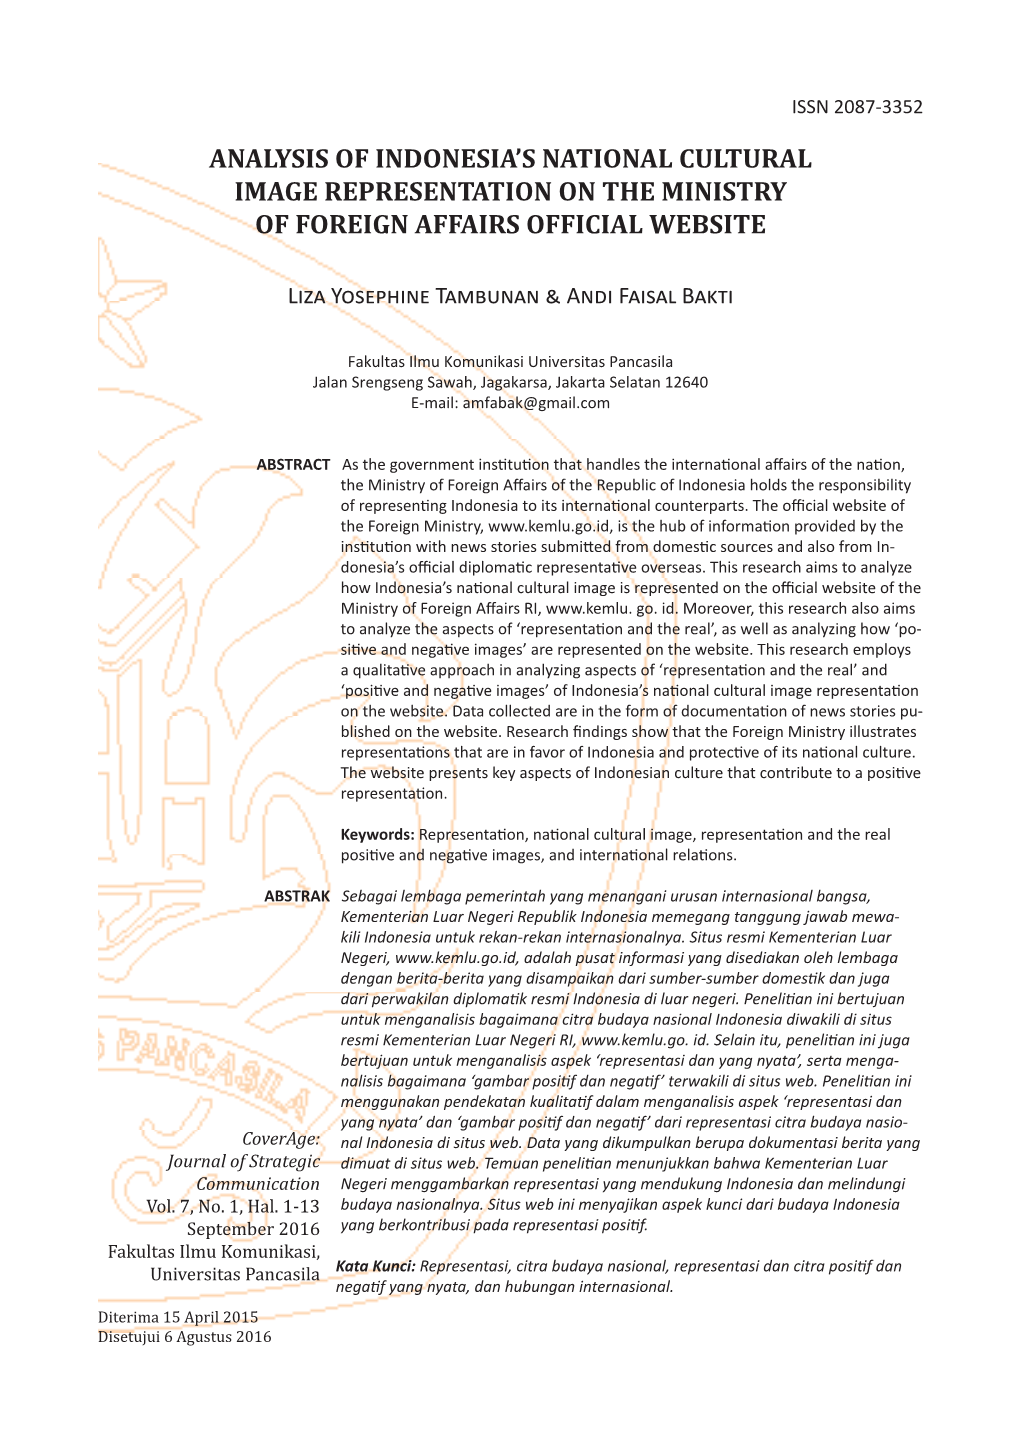 Analysis of Indonesia's National Cultural Image Representation On